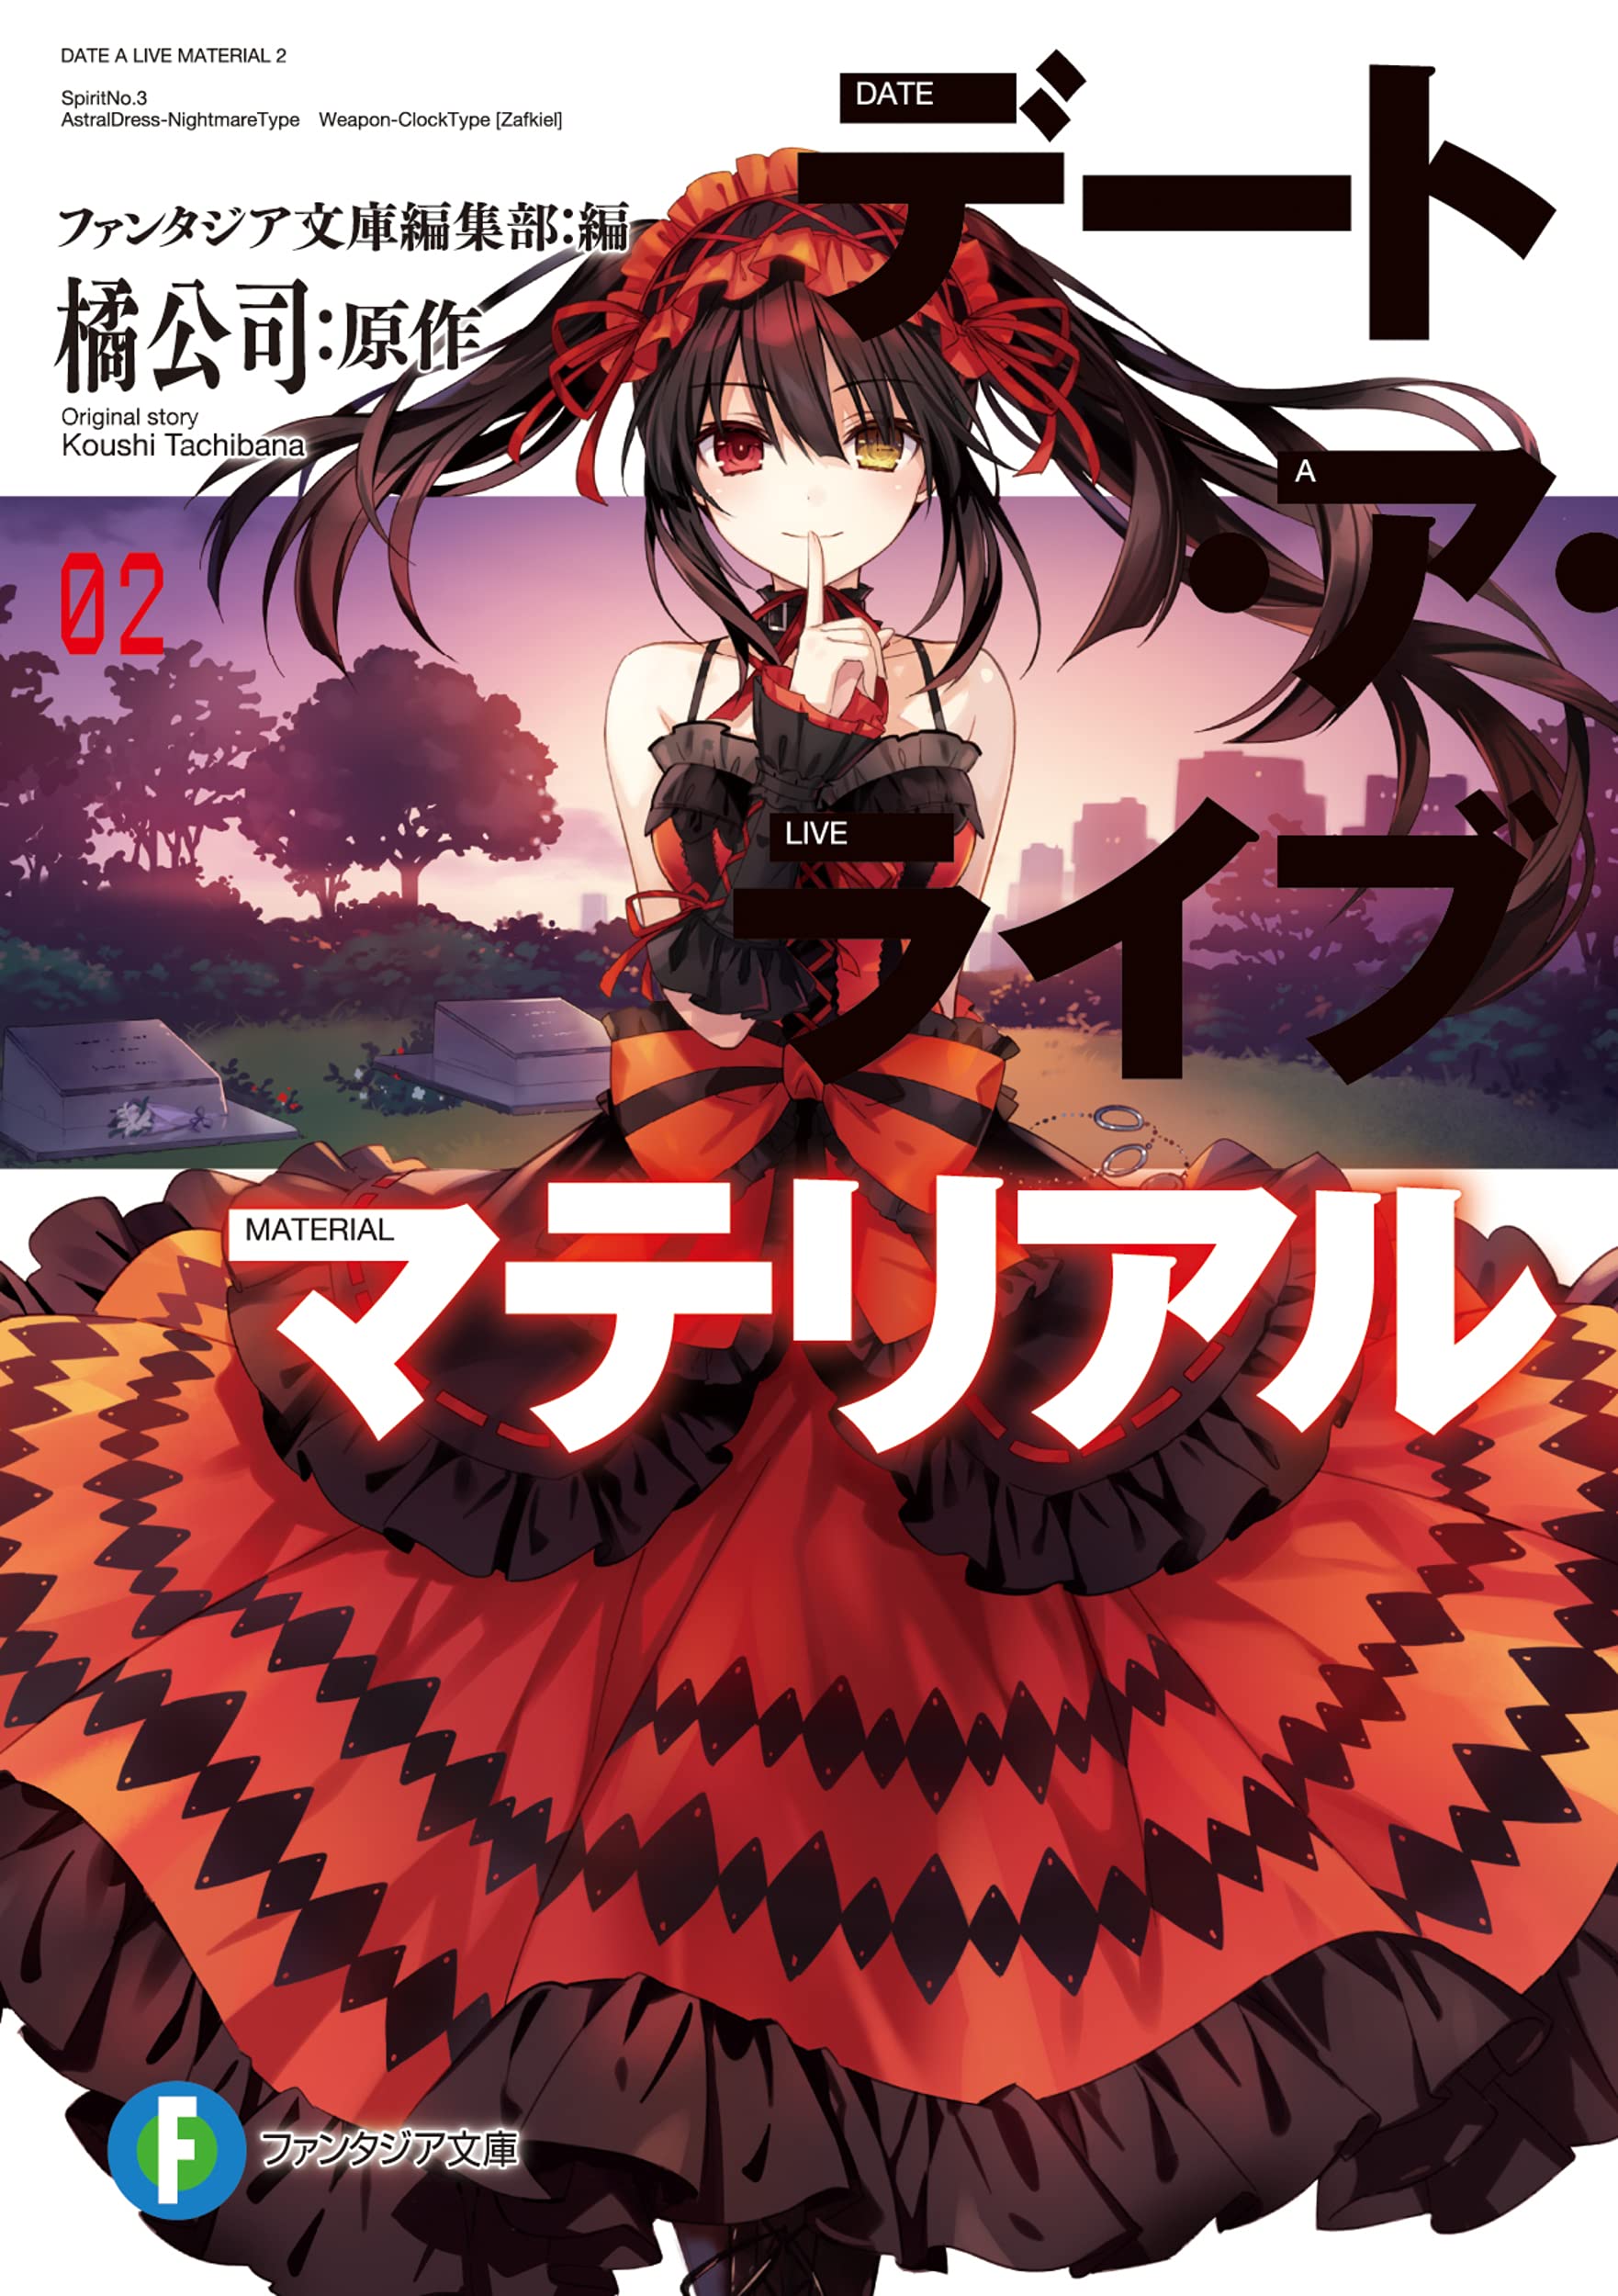 Date A Live V 